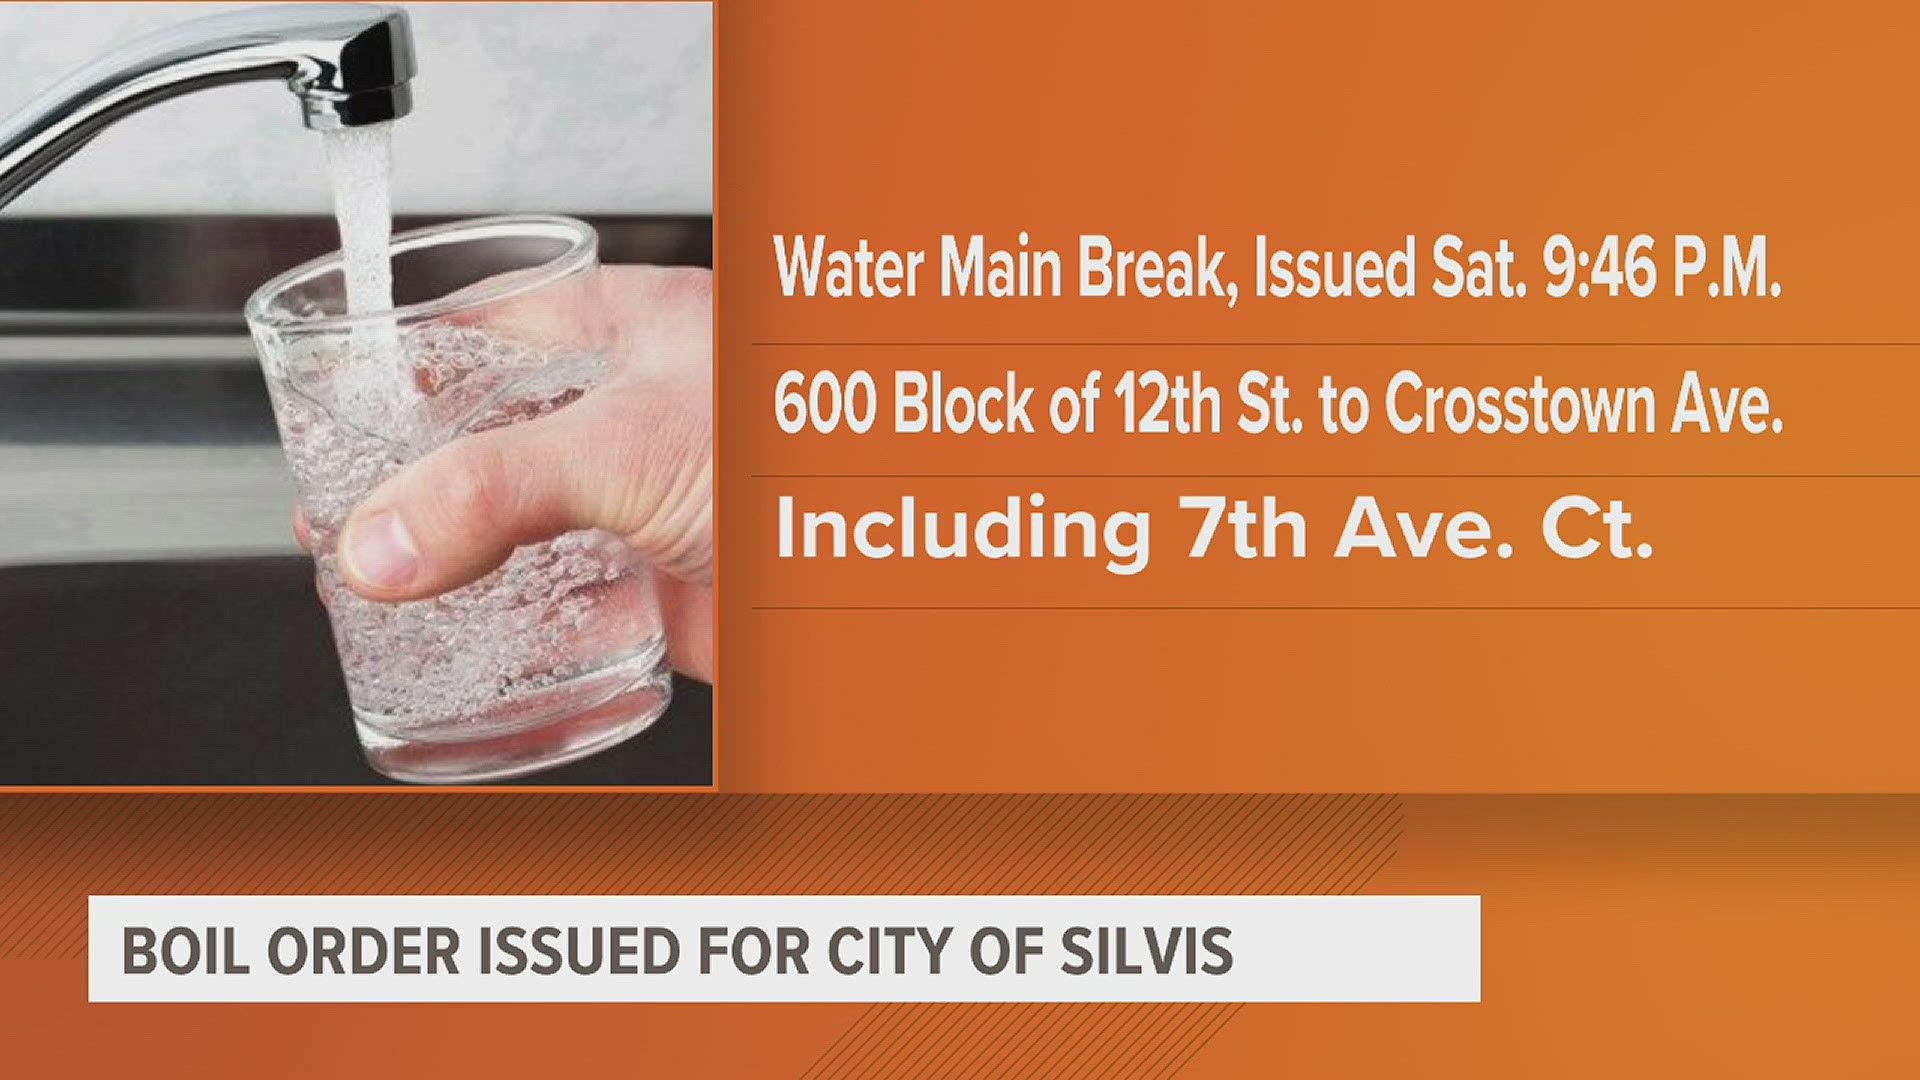 Residents in the 600 block of 12th Street and Crosstown Ave., and 7th Ave. Court are under a boil order after a water main break in the city.